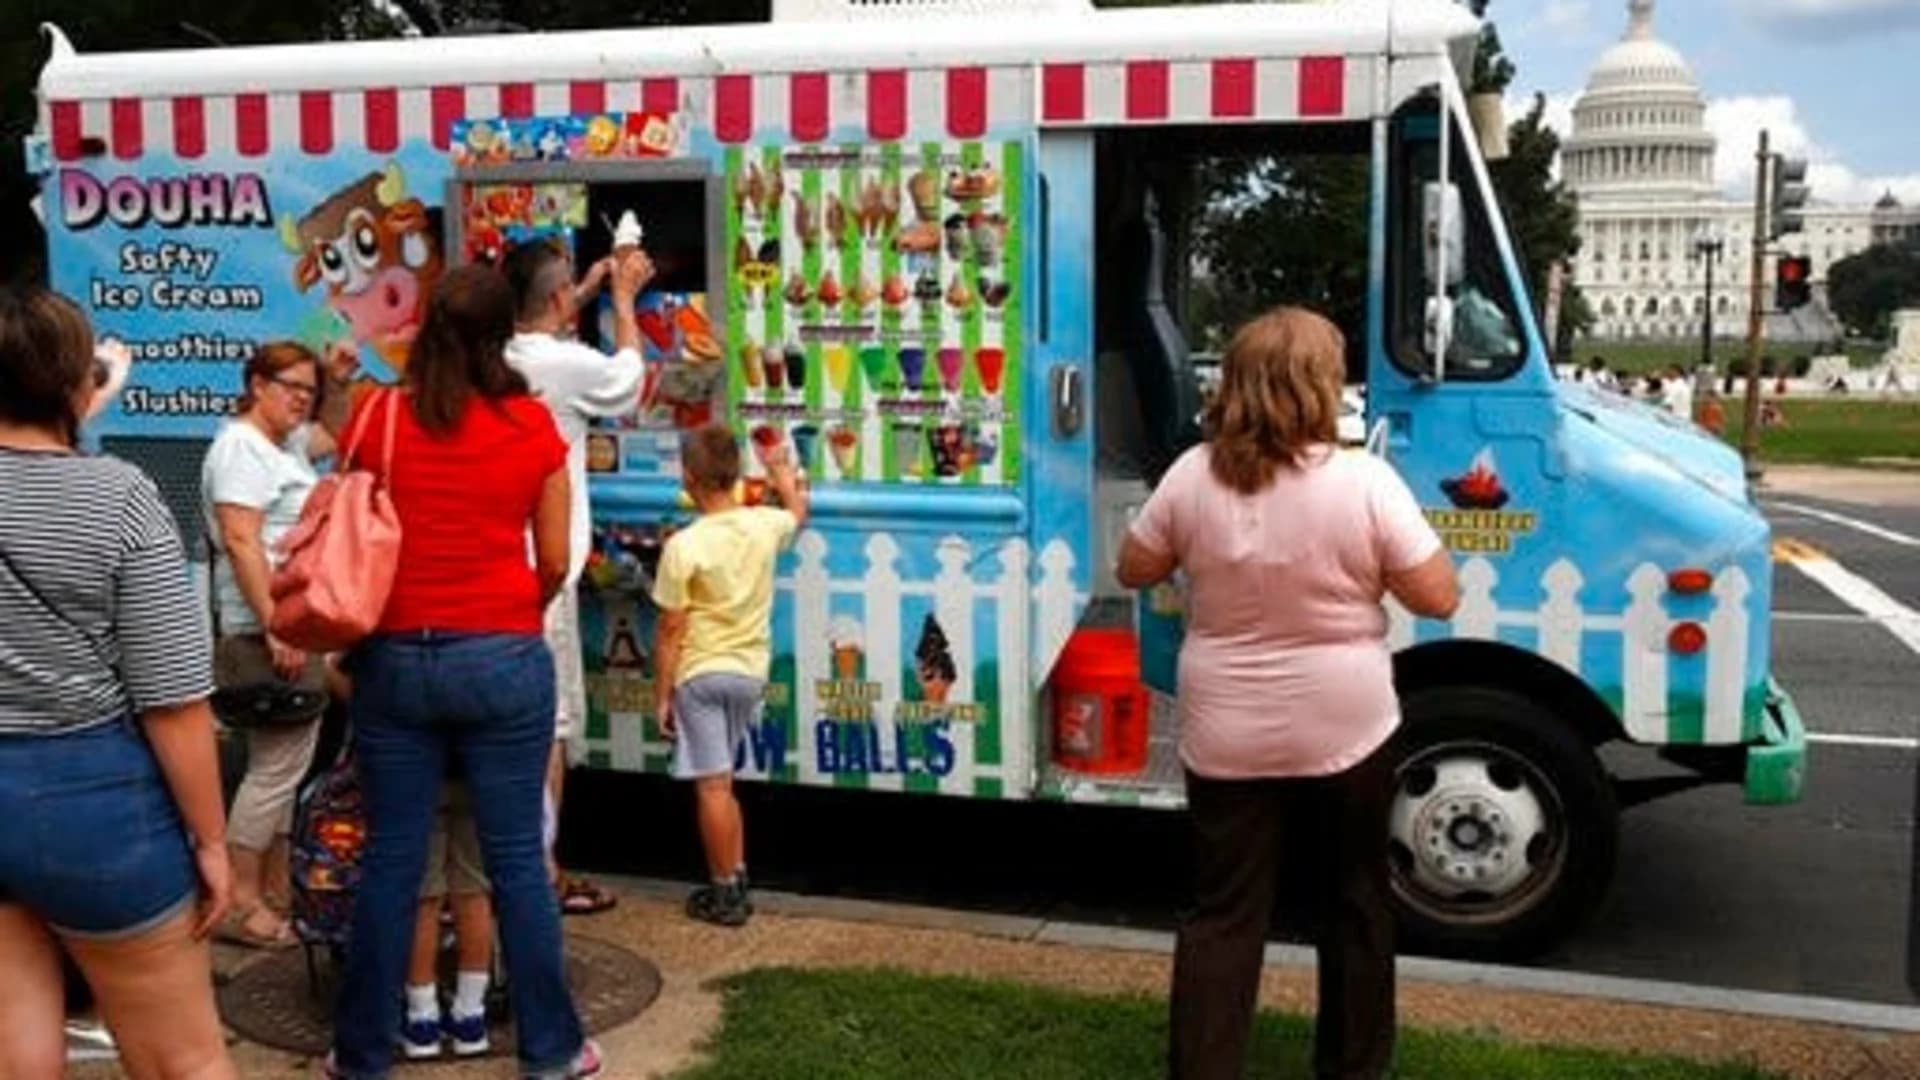 Guide: Where to find food trucks in Connecticut